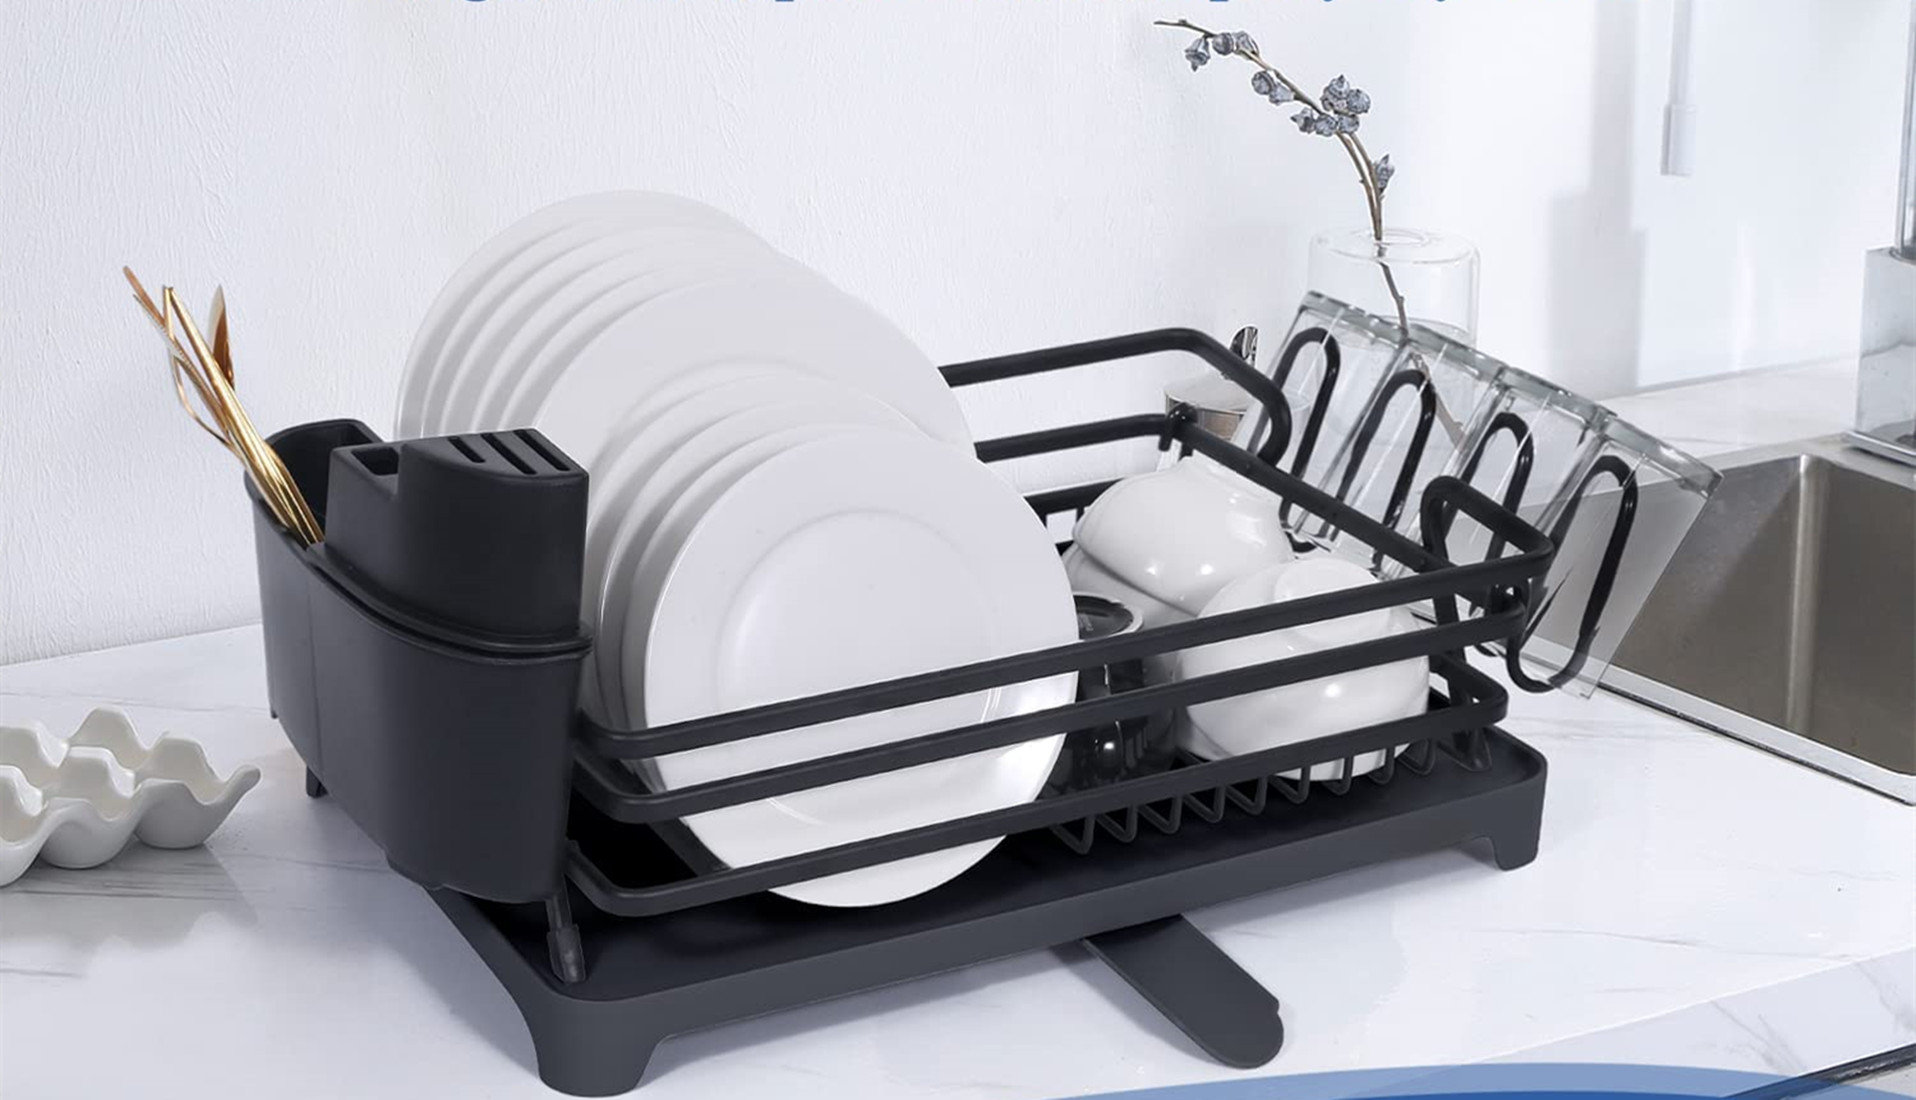 ASTER-FORM CORP Metal 2 Tier Dish RackWith Drainboard With Adjustable  Swivel Spout